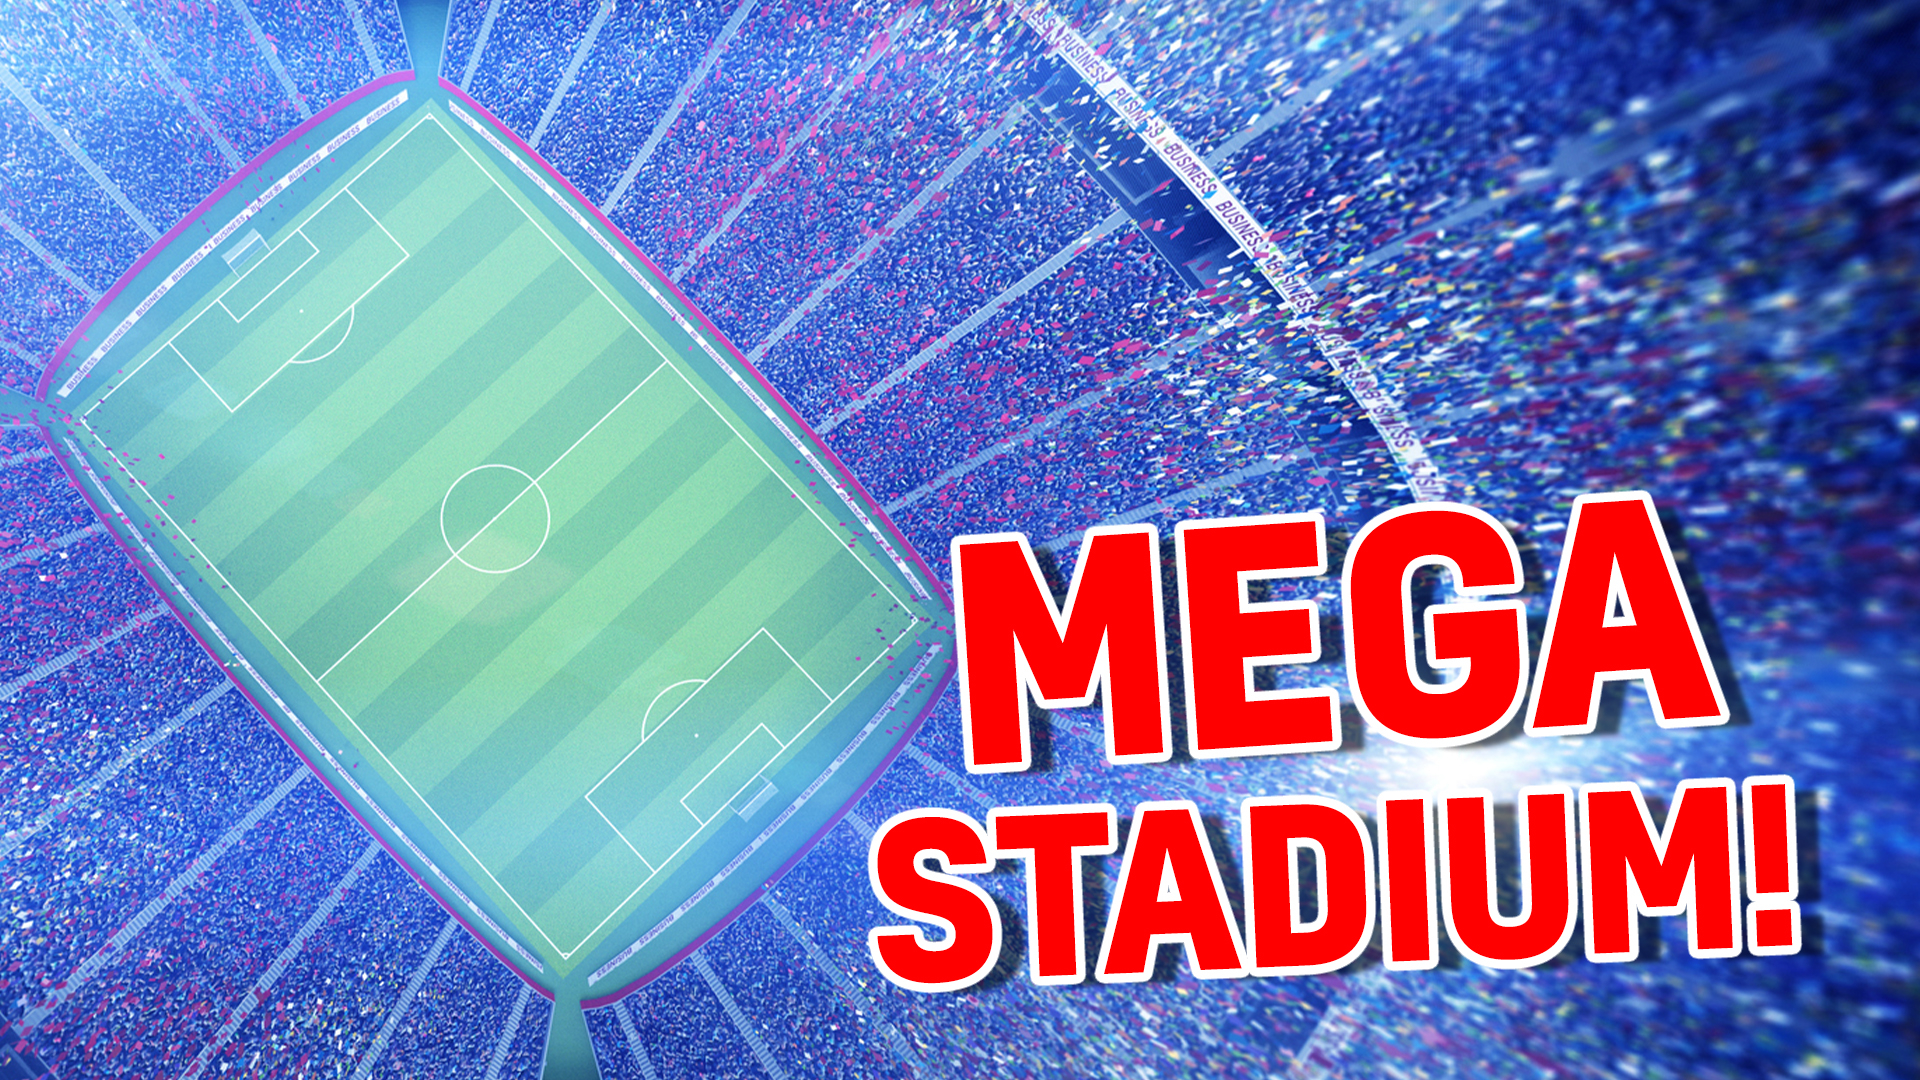 Your team will play in a: MEGA STADIUM!